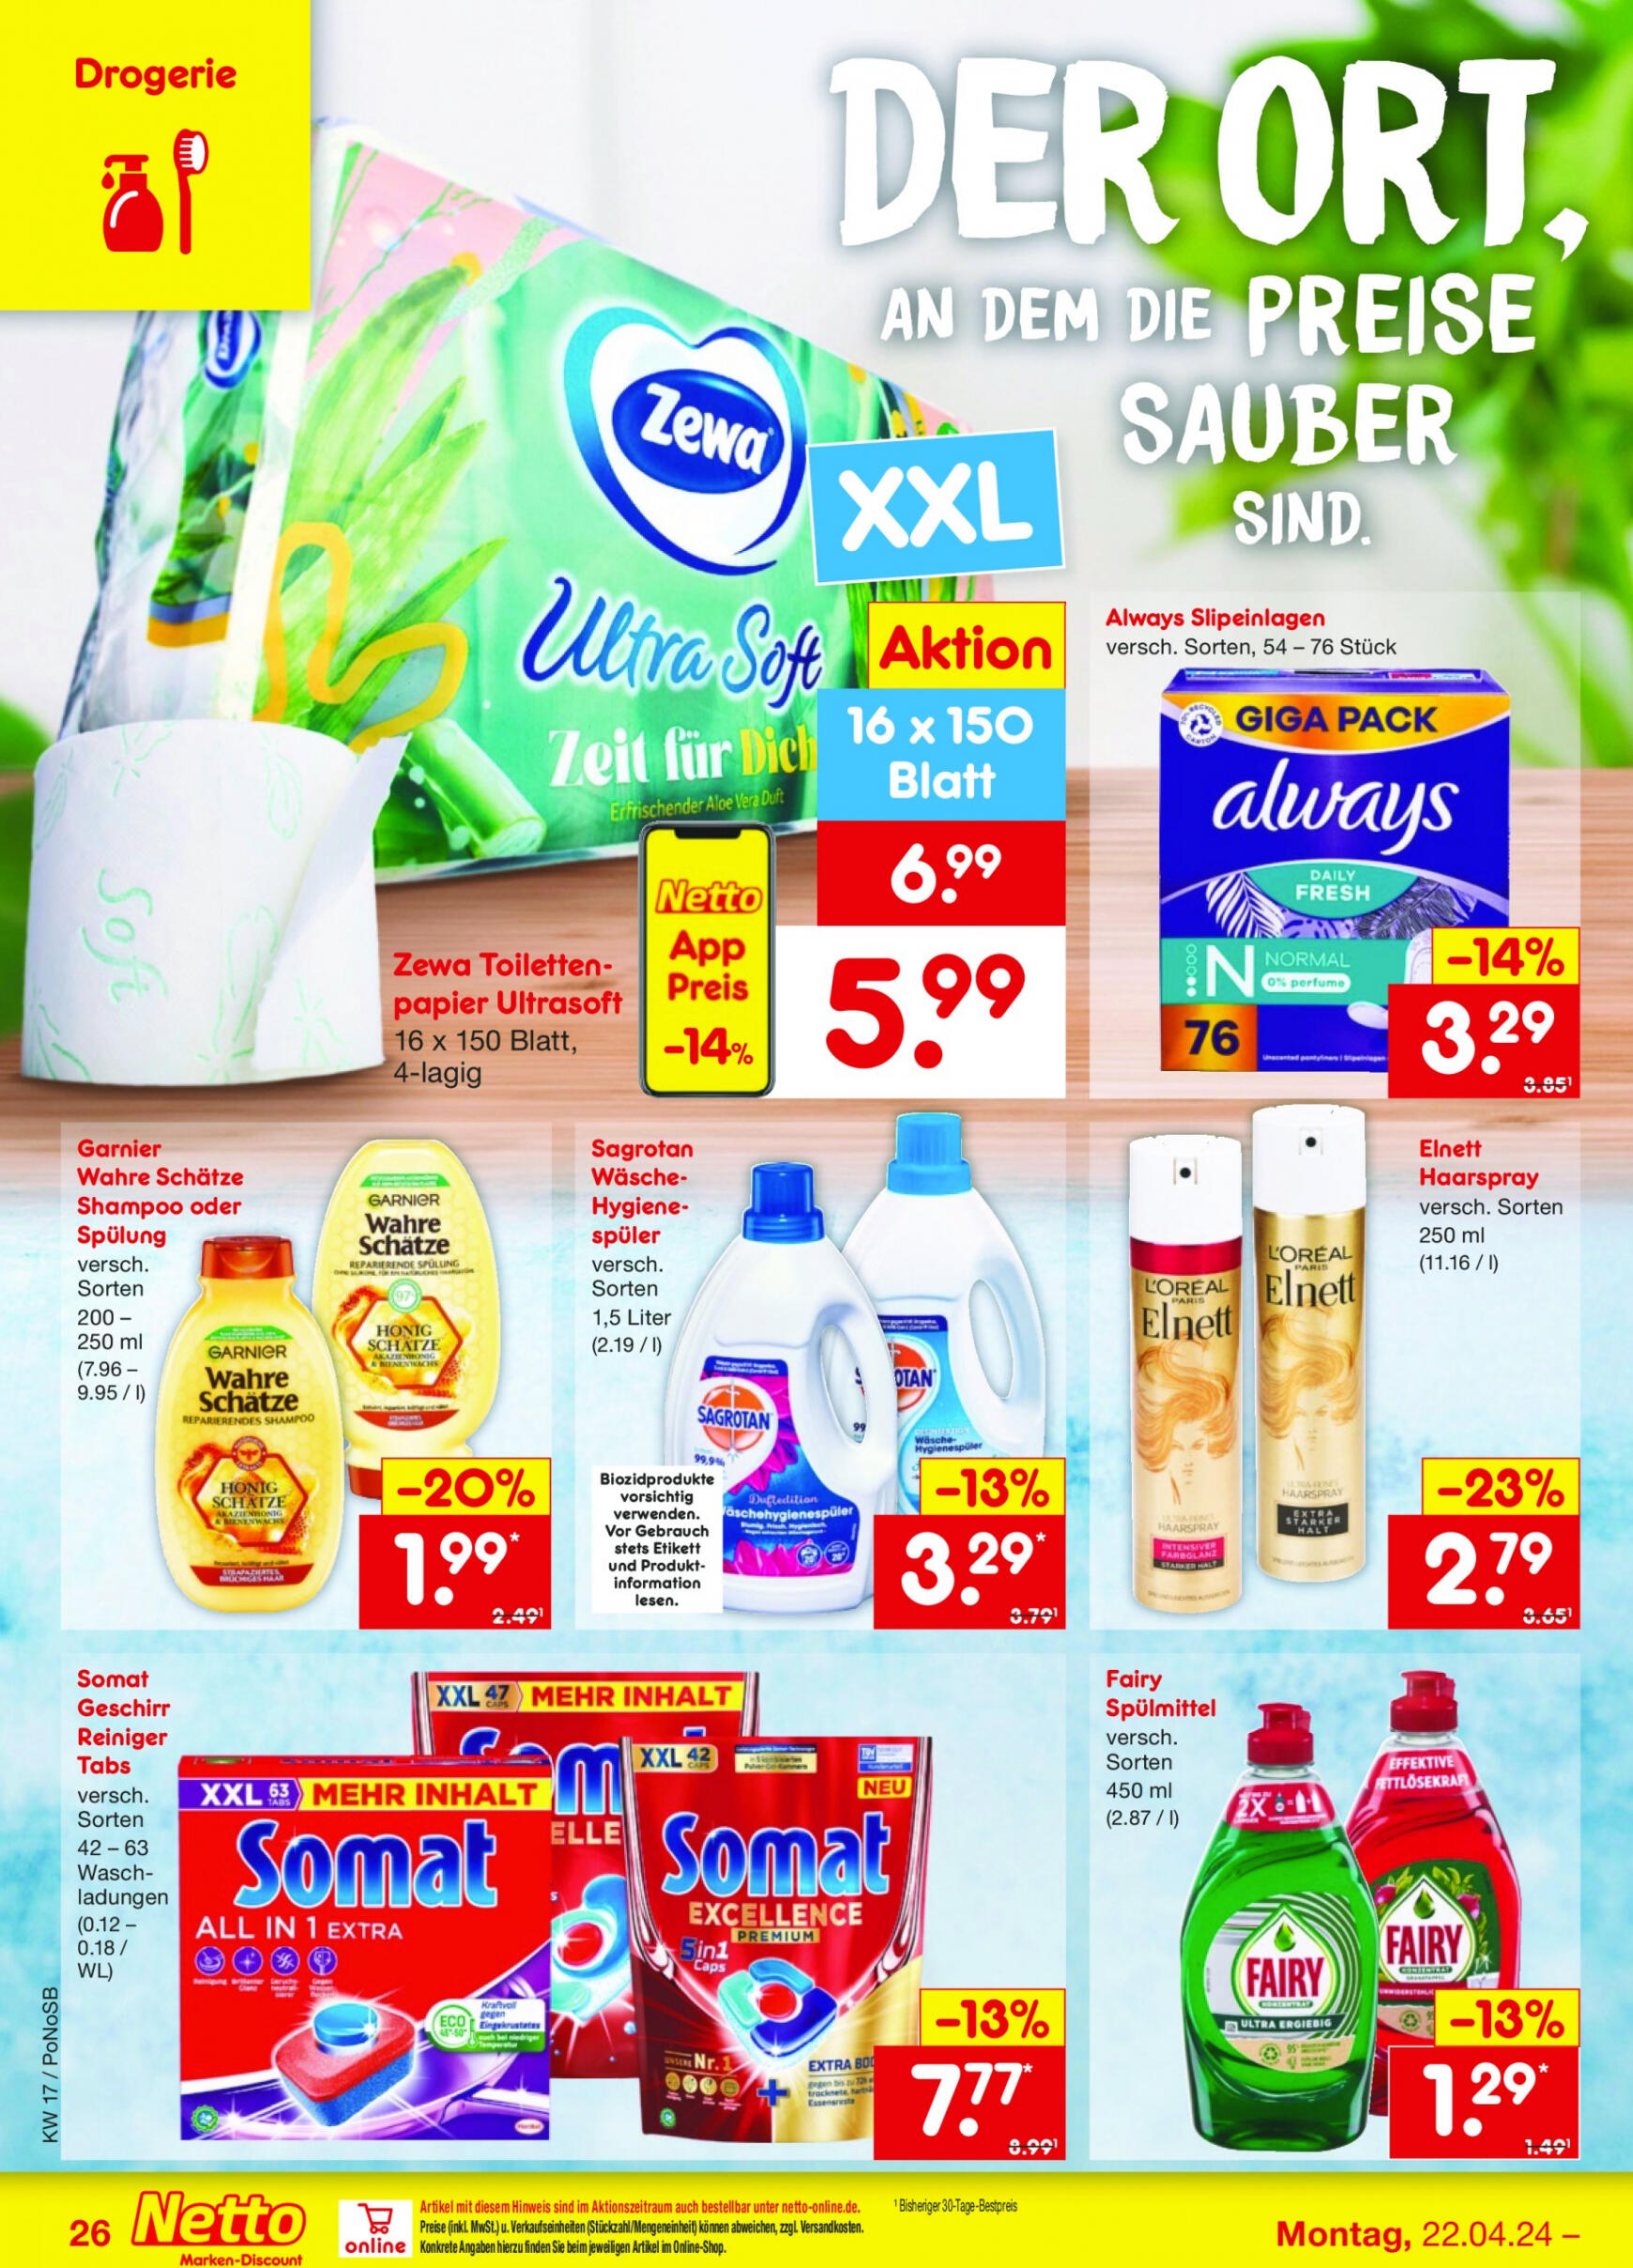 netto - Flyer Netto aktuell 22.04. - 27.04. - page: 28